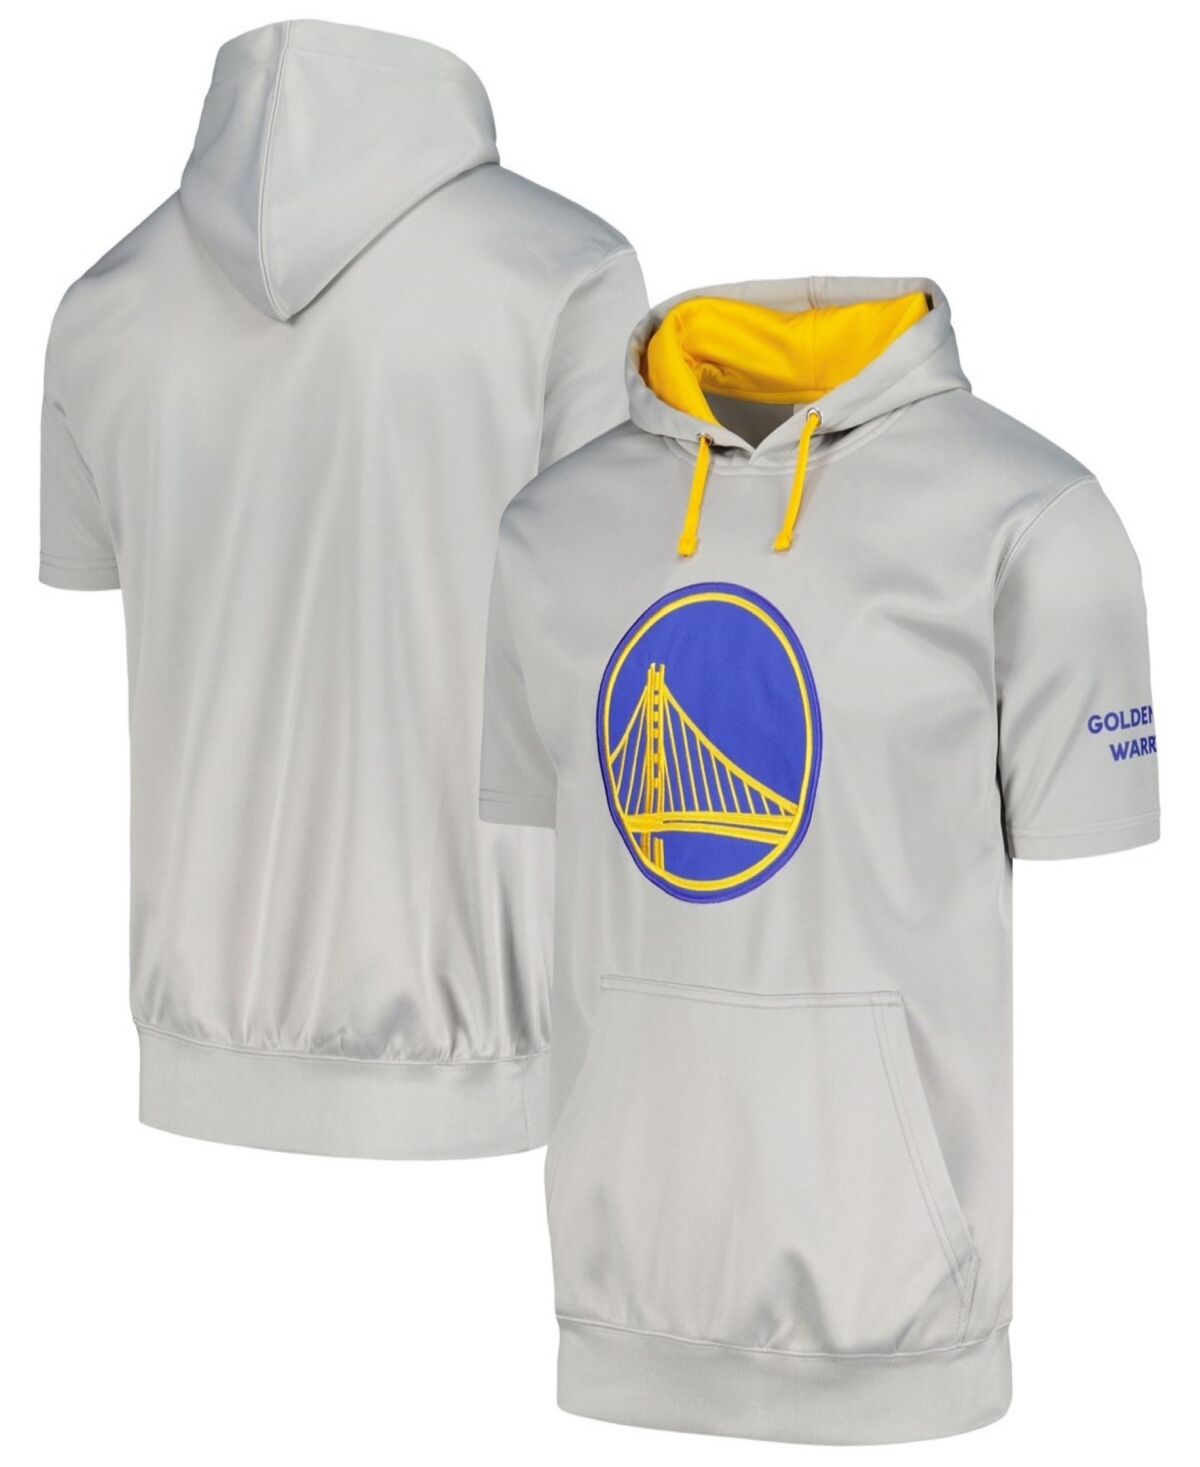 Branded Men's Silver Golden State Warriors Big Tall Logo Pullover Hoodie - Silver Gol